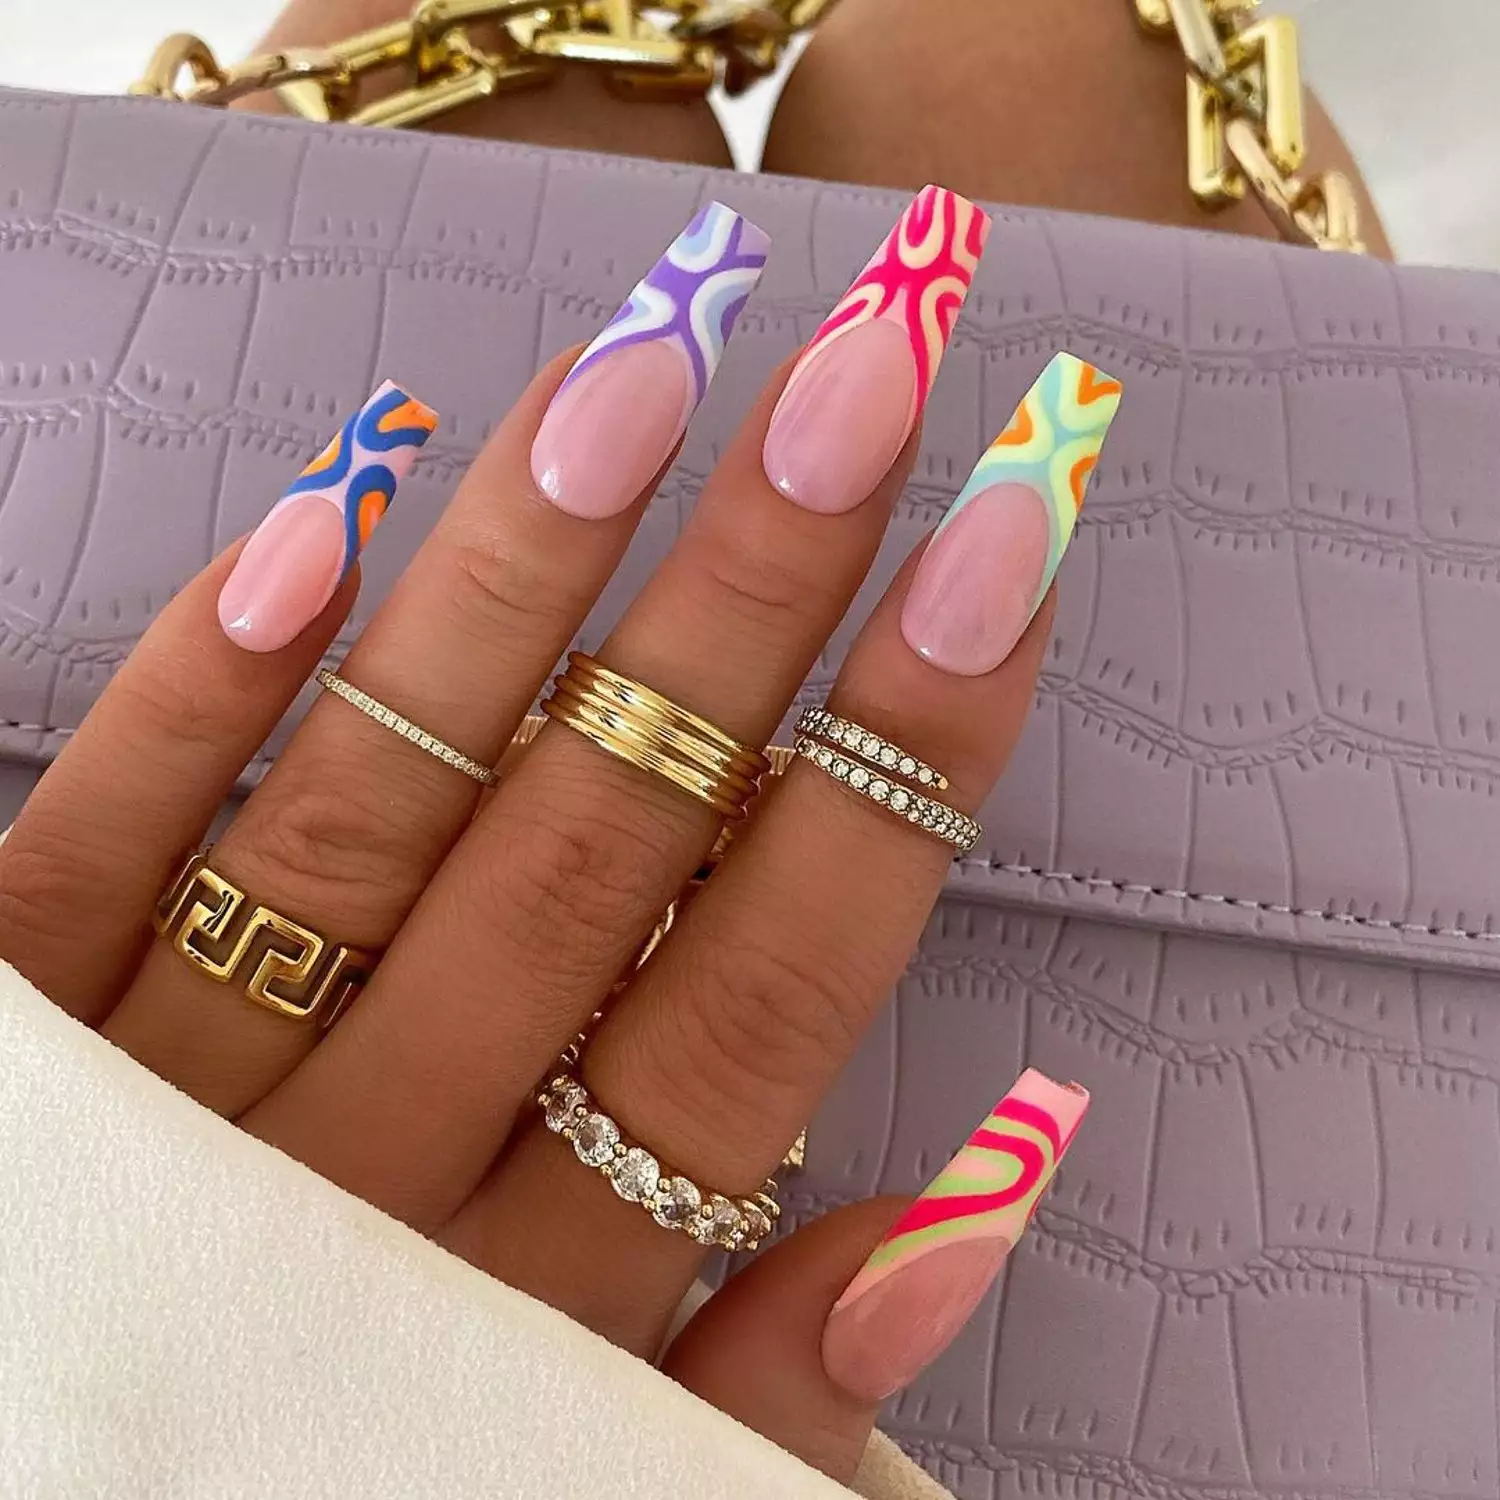 French manicure with mismatched colorful abstract designs on tips